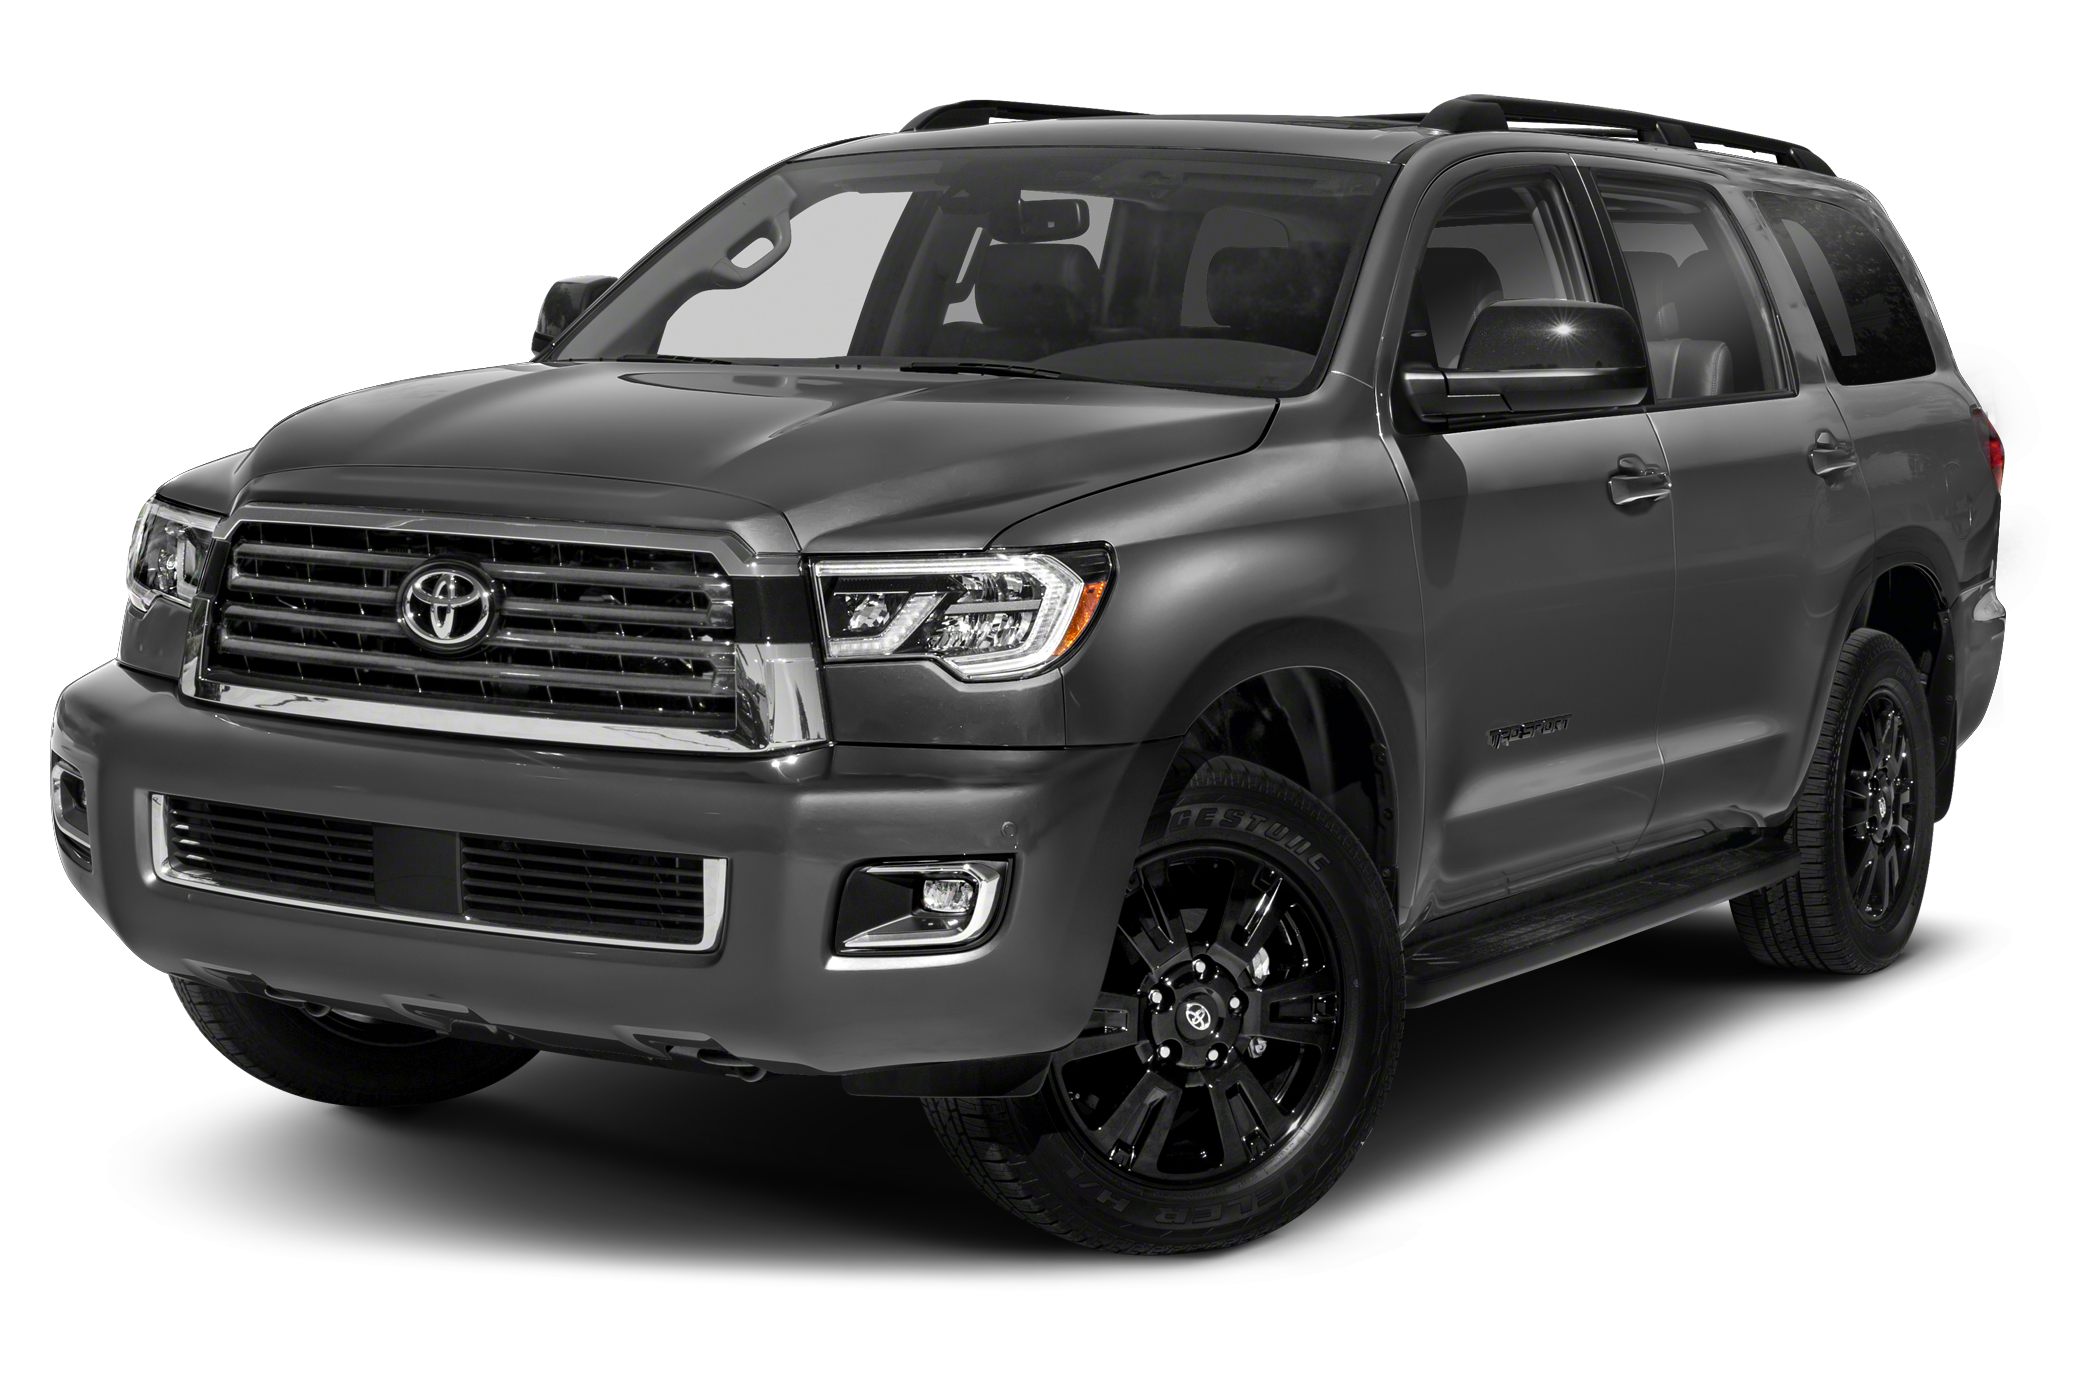 2020 Toyota Sequoia Trd Sport 4dr 4x2 Pictures